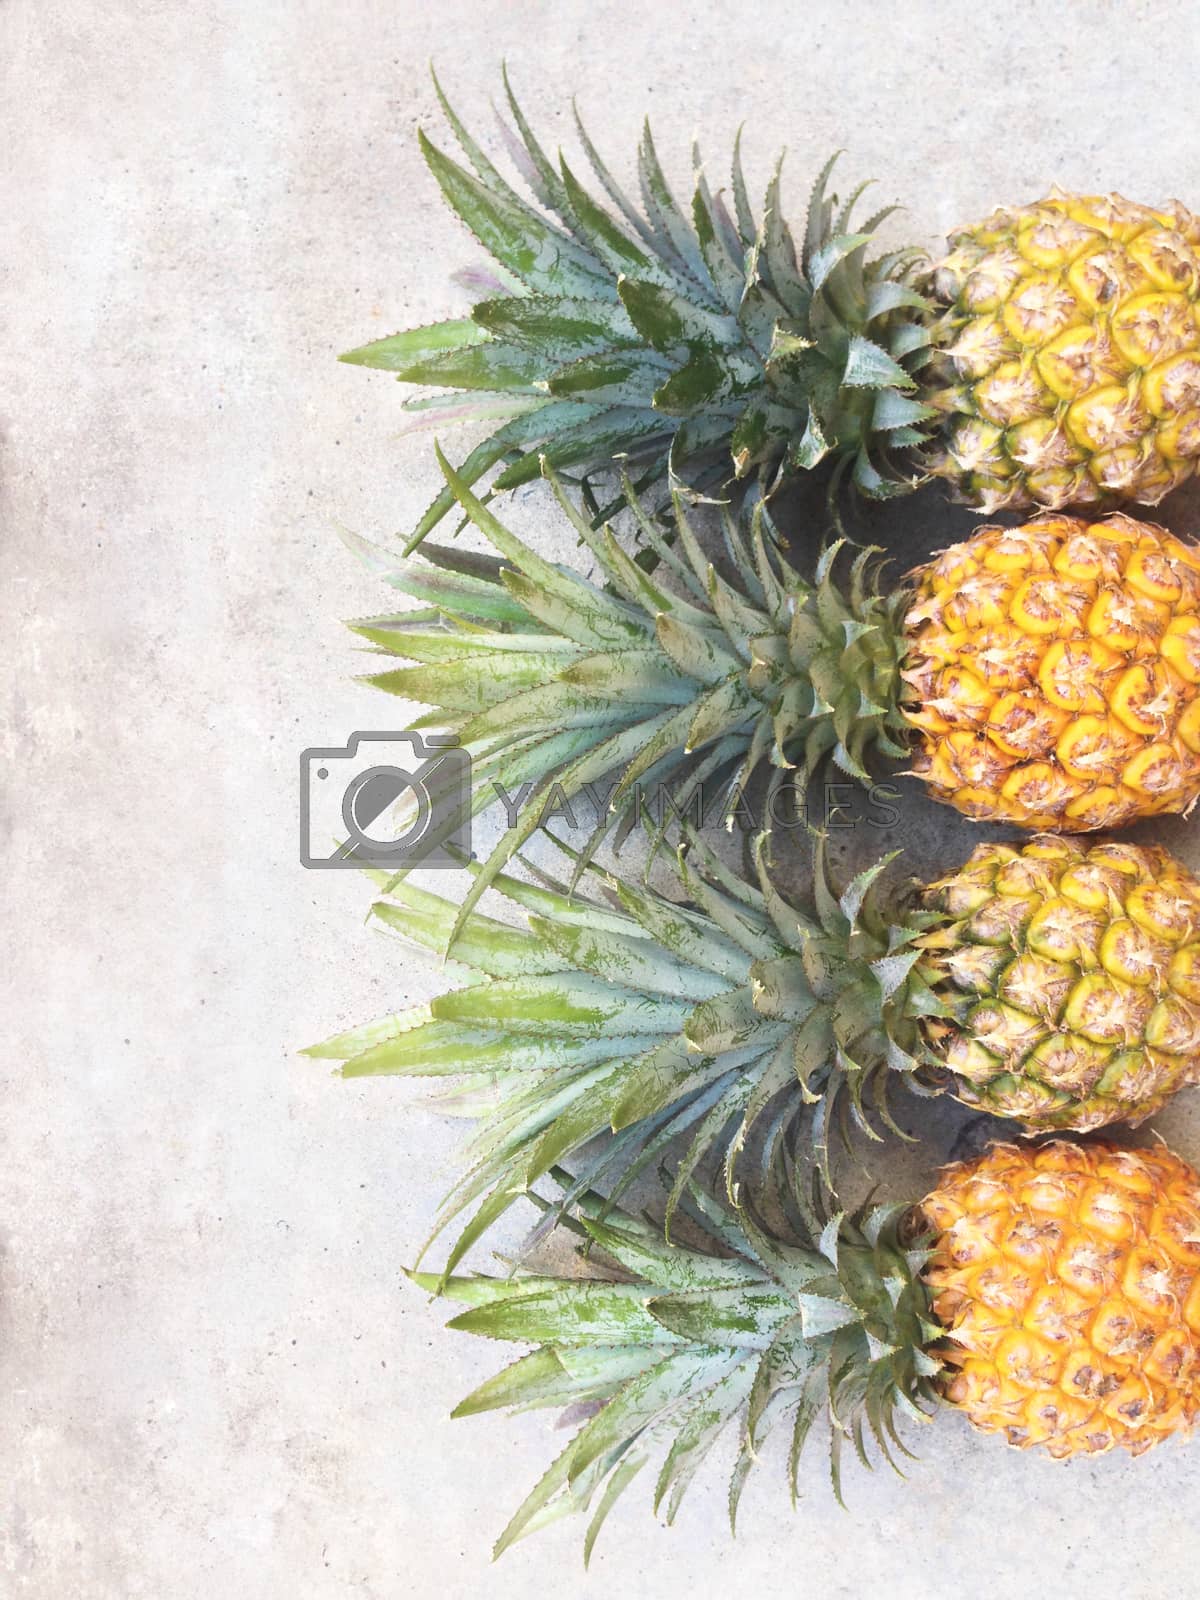 Royalty free image of Pineapple isolated on cement floor by Bowonpat